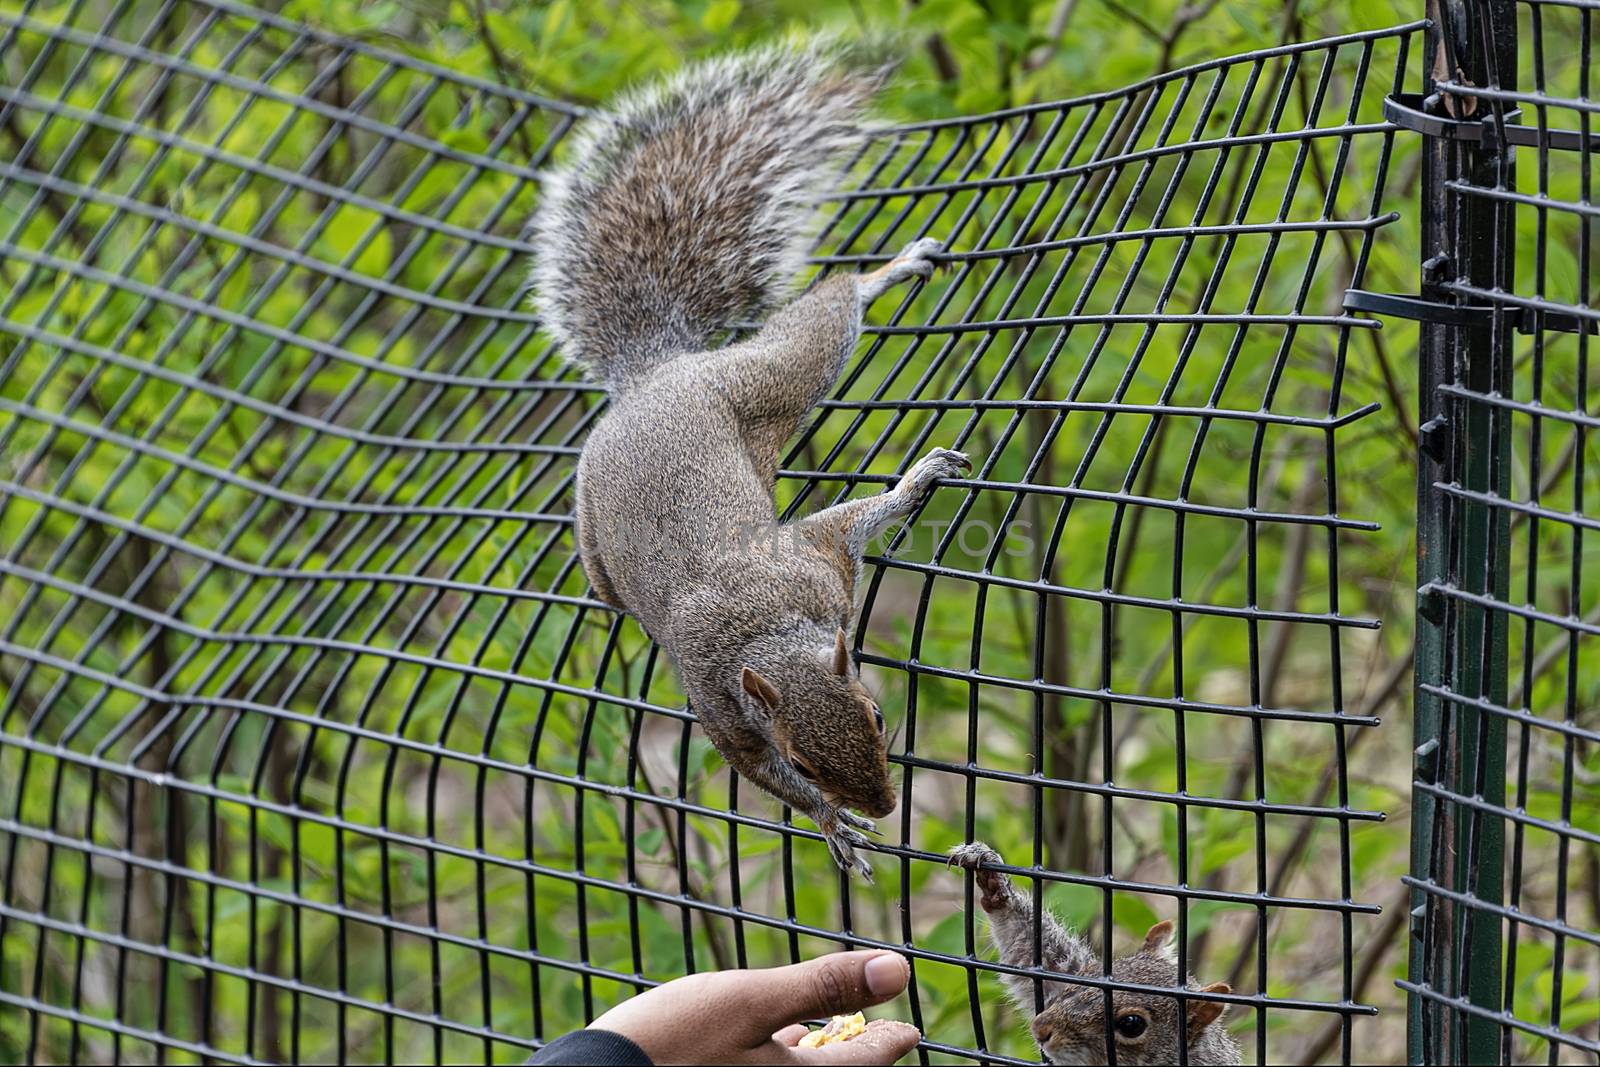 USA, New York - May 2019: Hand feeding squirrels in the park